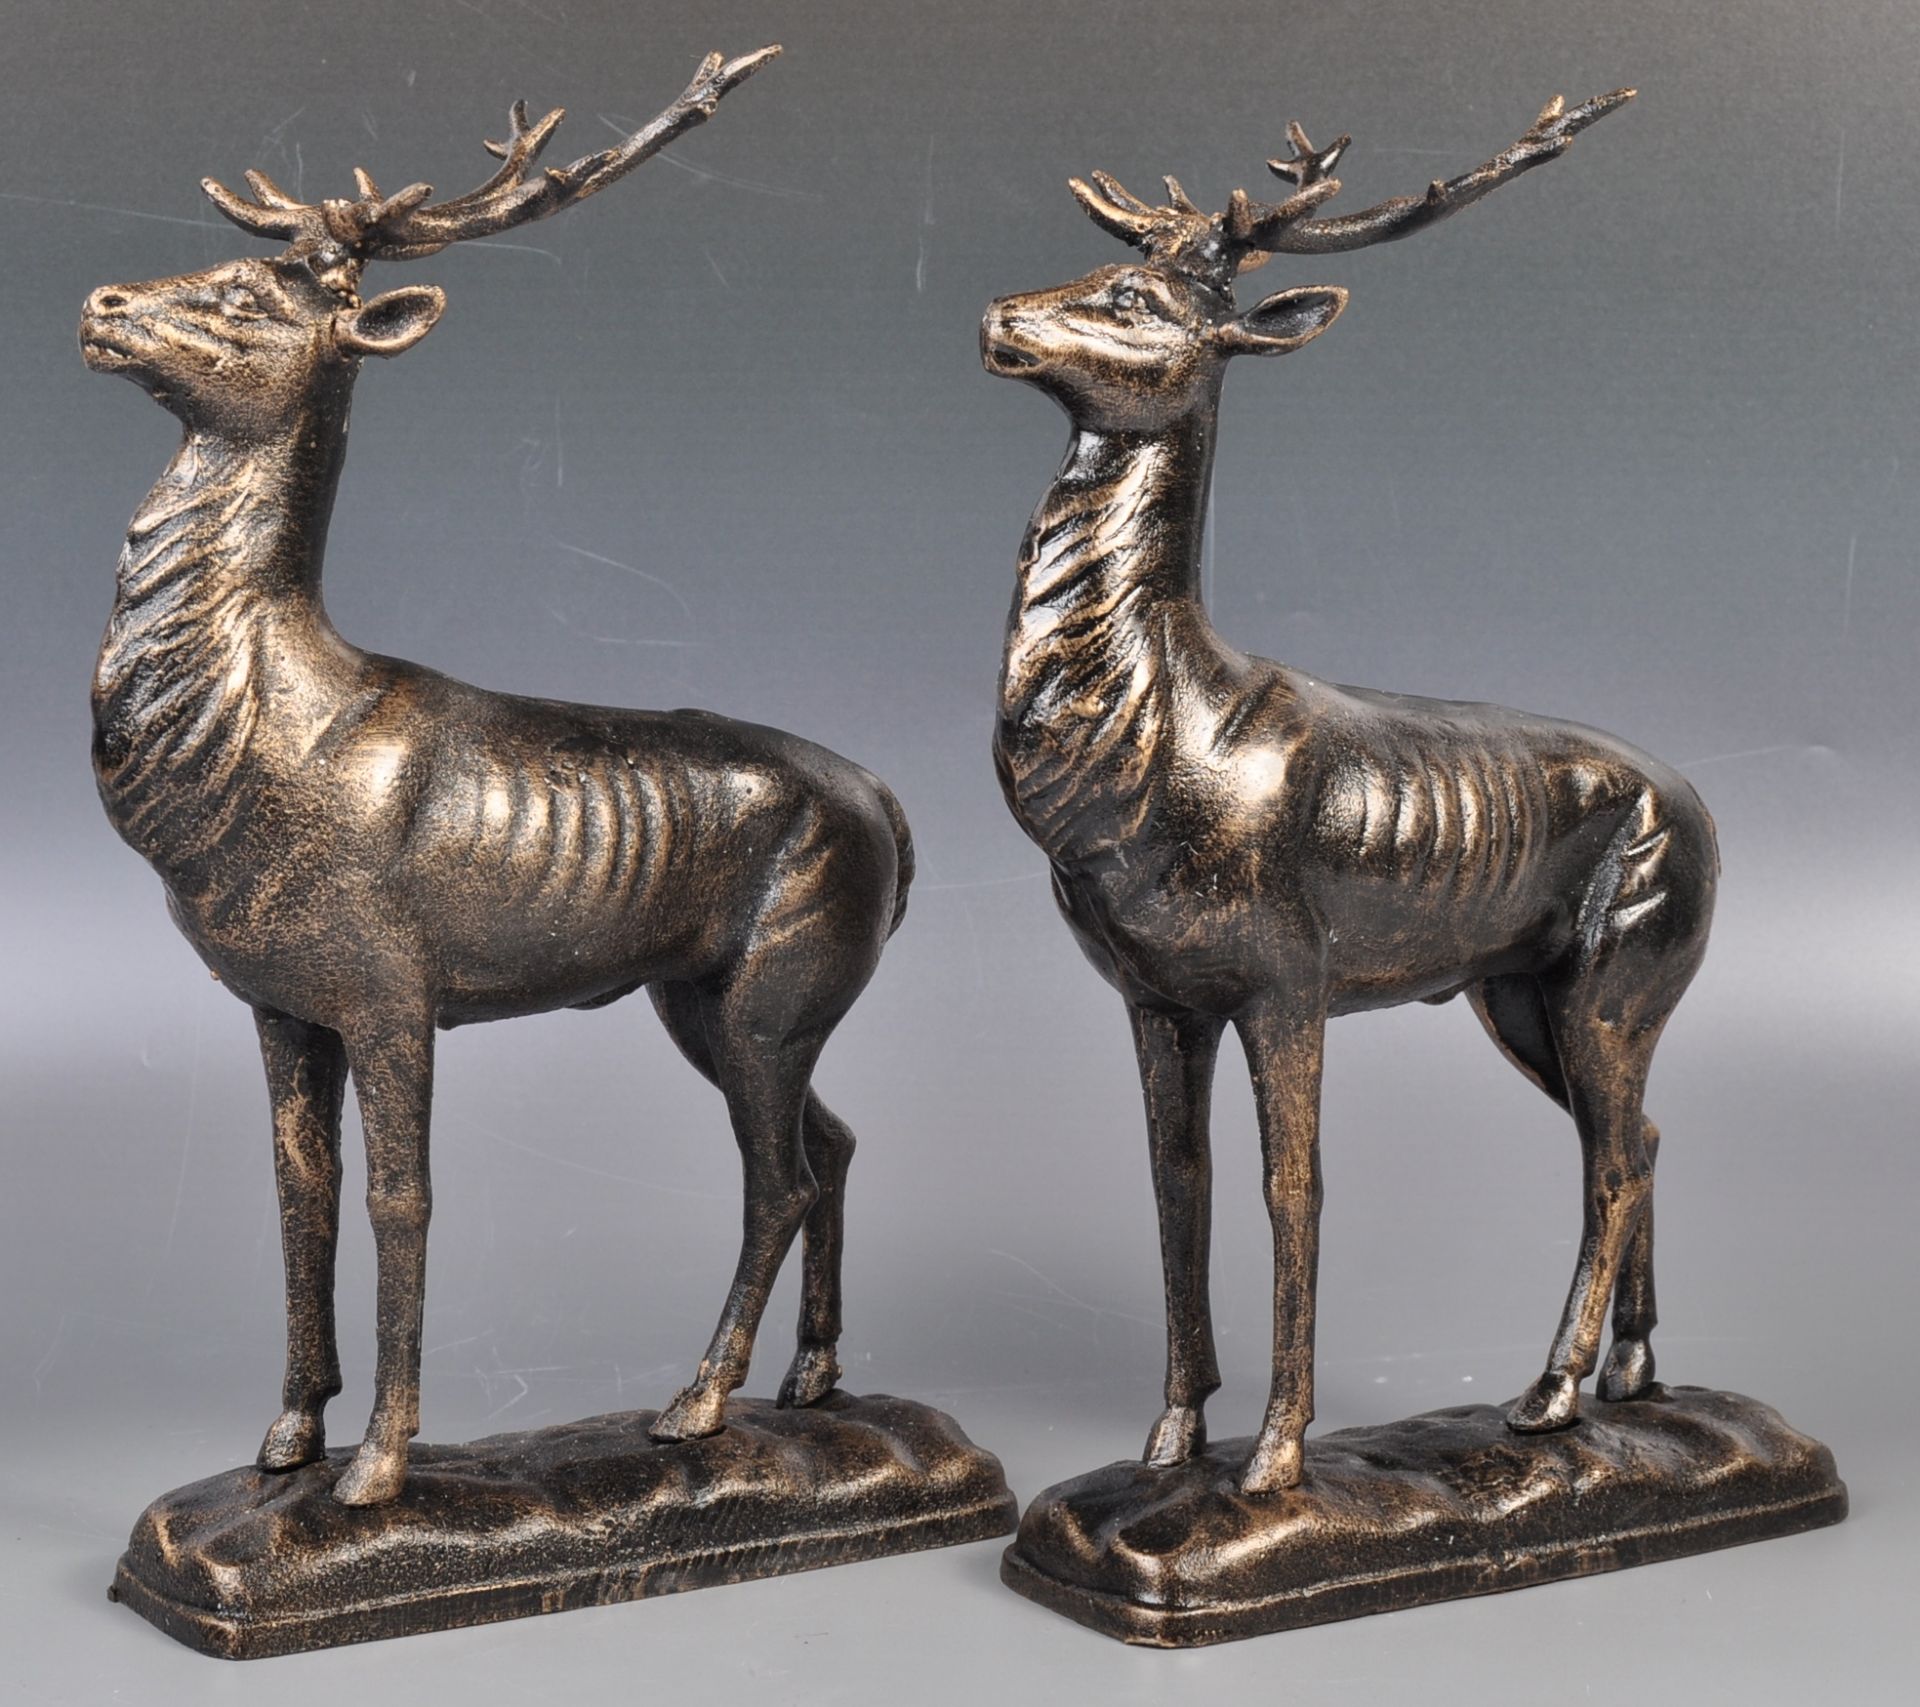 PAIR OF ANTIQUE STYLE FIGURES OF DEER / STAGS